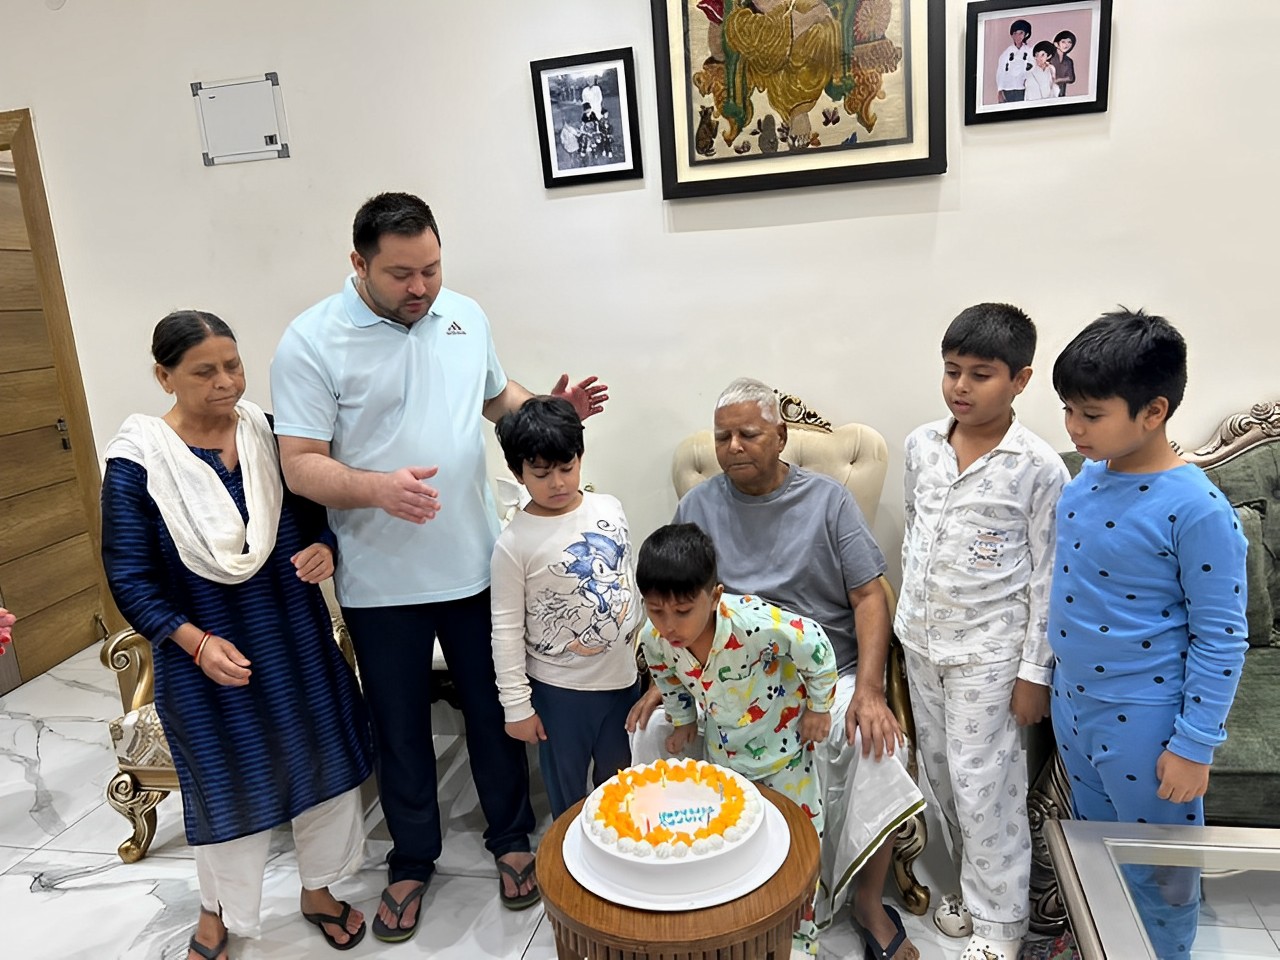 Former CM Lalu Yadav Celebrates 76th Birthday Amidst Warm Wishes and Praises for His Contributions